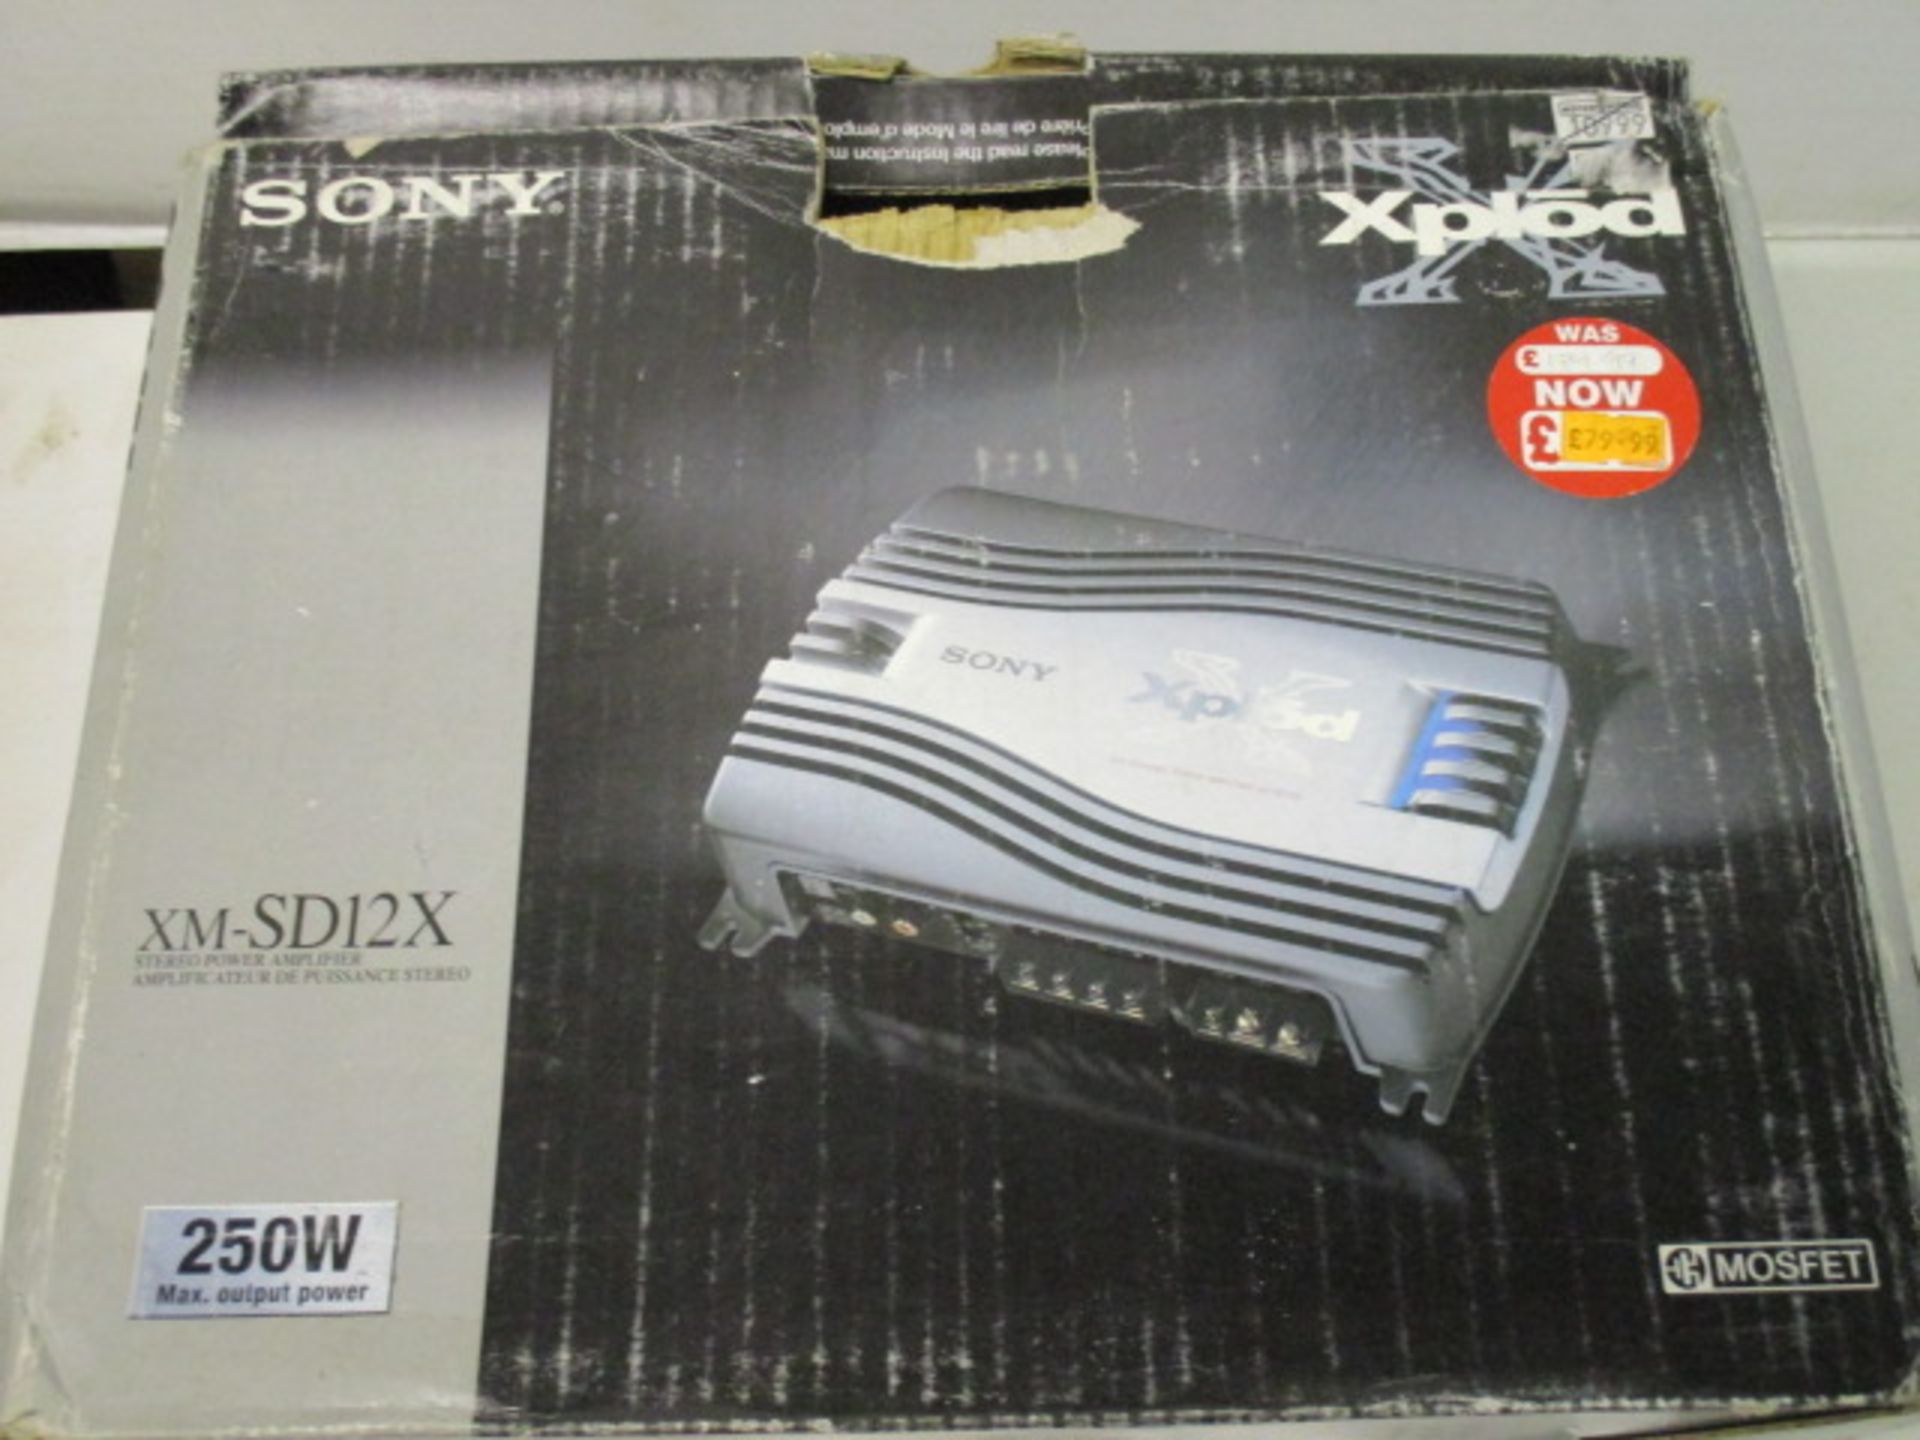 Sony Xplode amplifier unit - boxed new and unused with manual - rrp £179.99